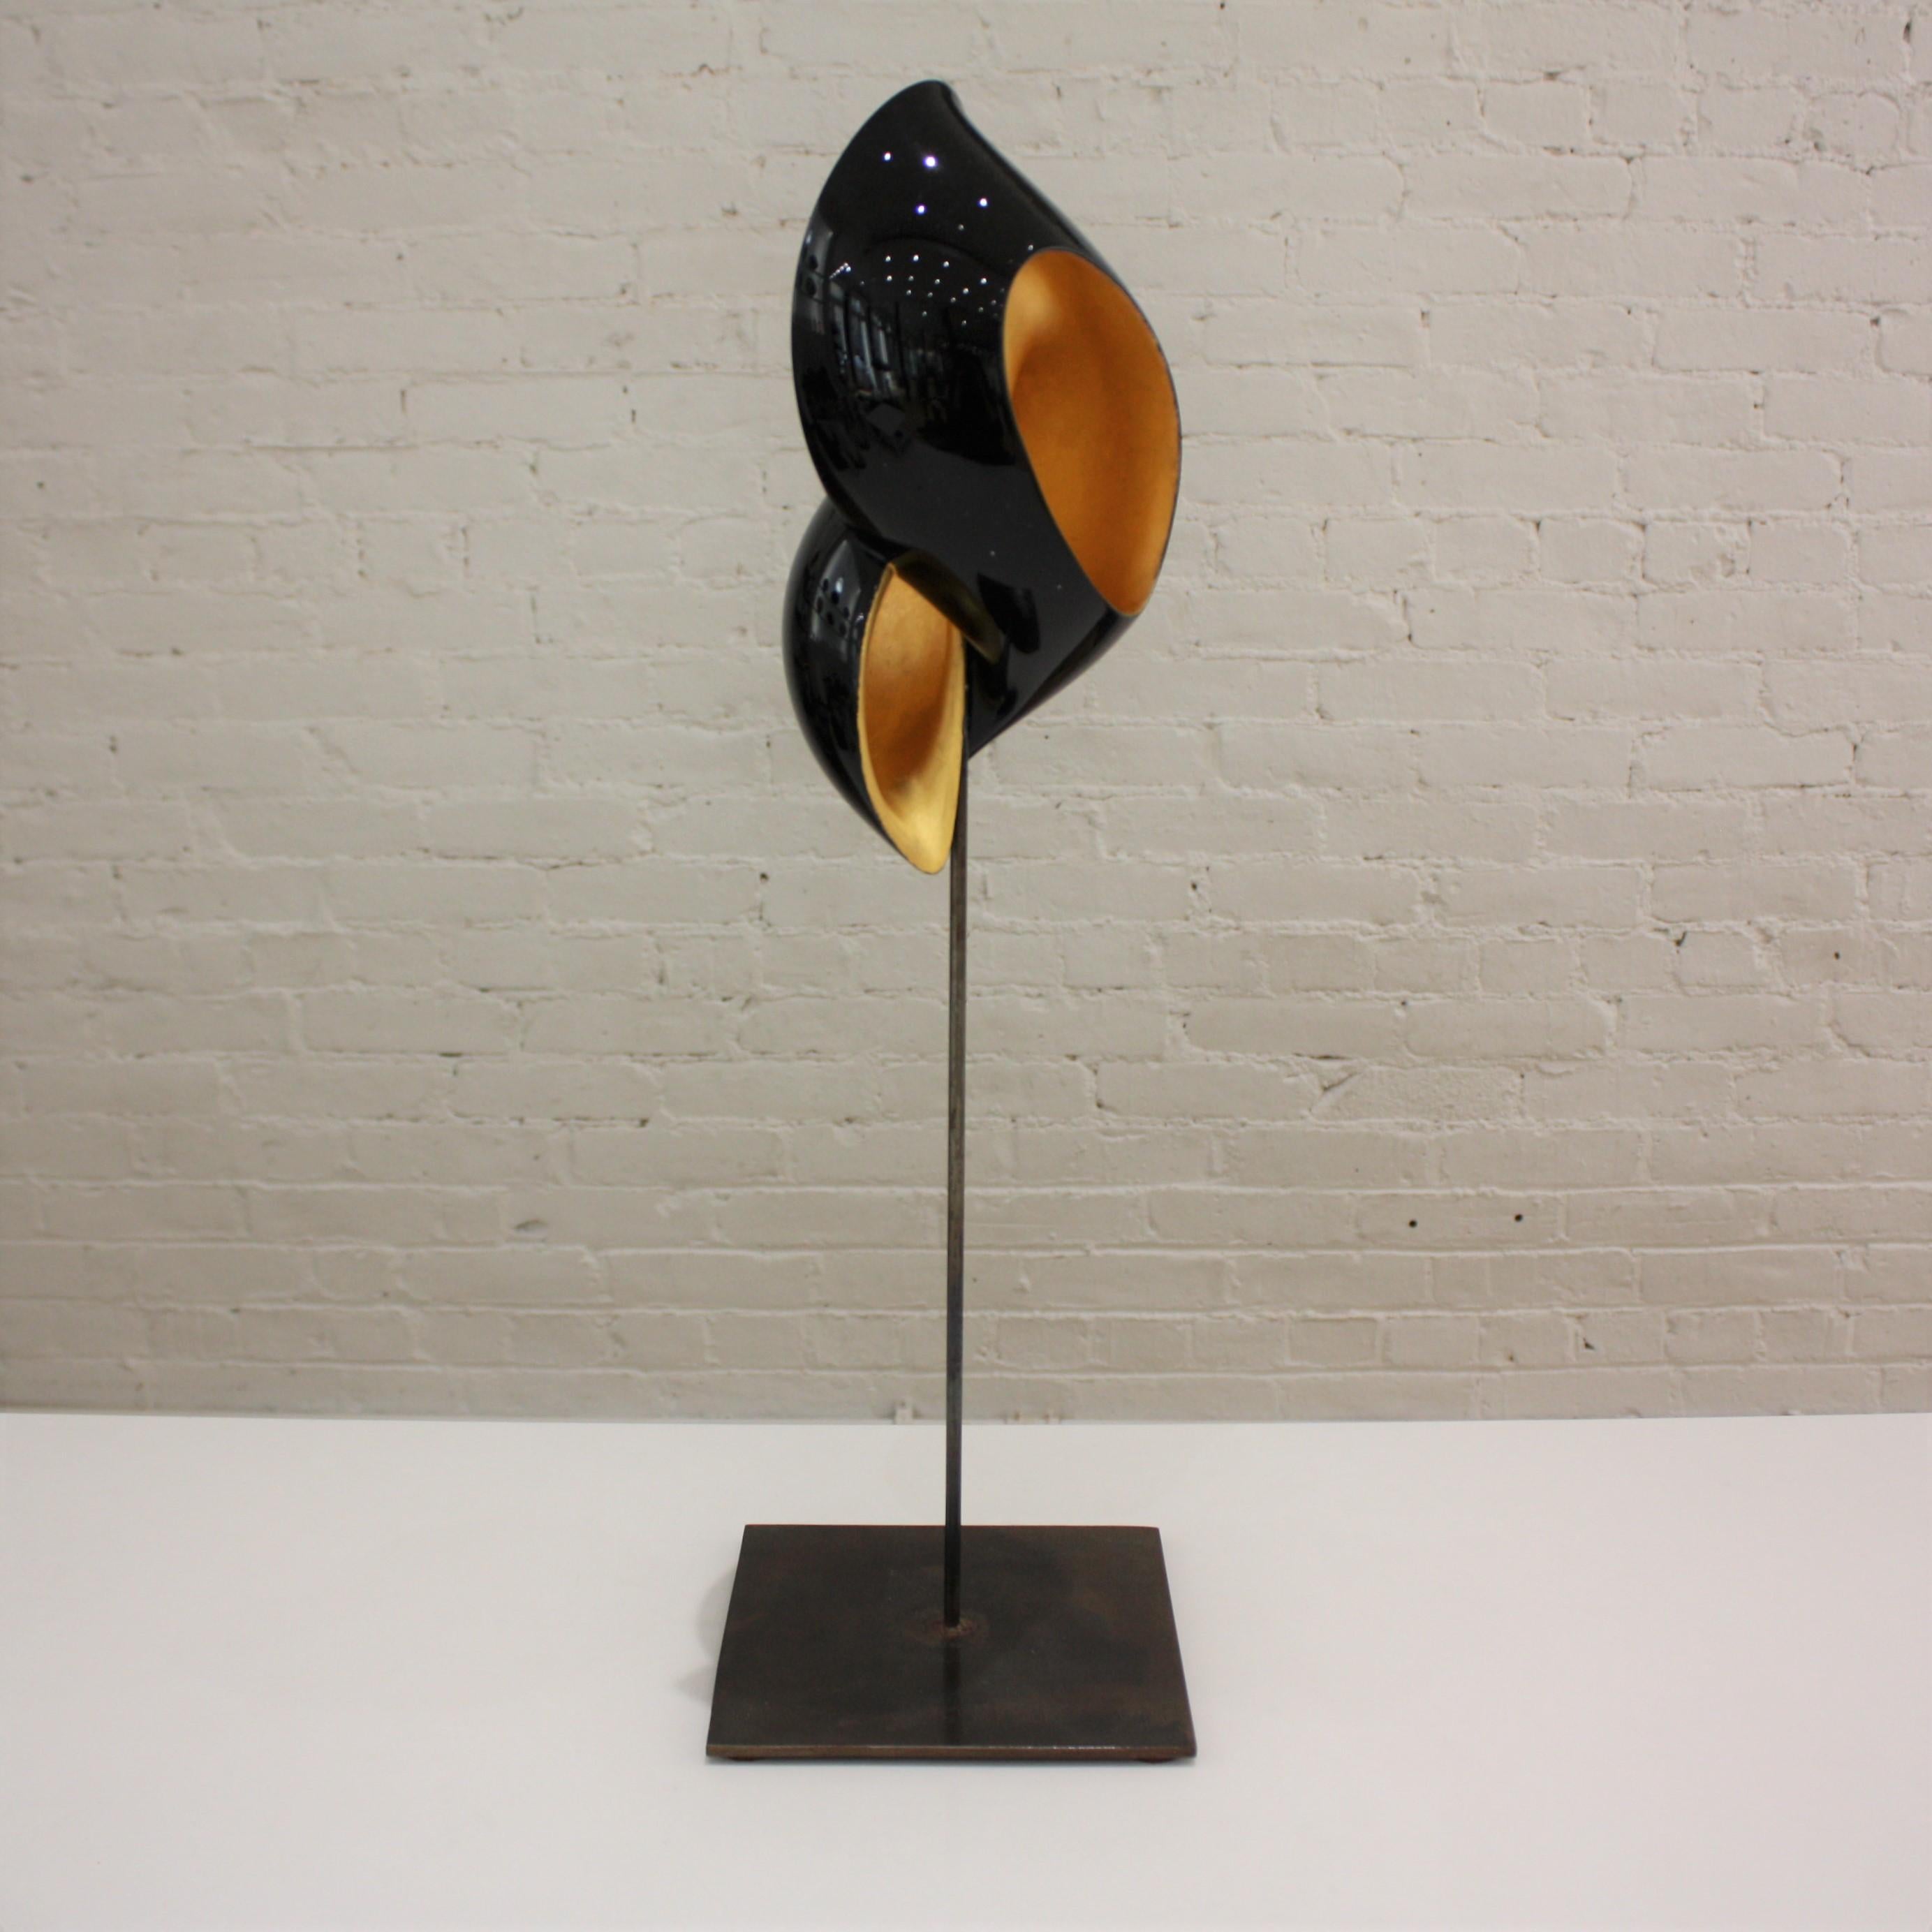 Laquered Wood and Gold Shell Sculpture, Turitella 03M 2